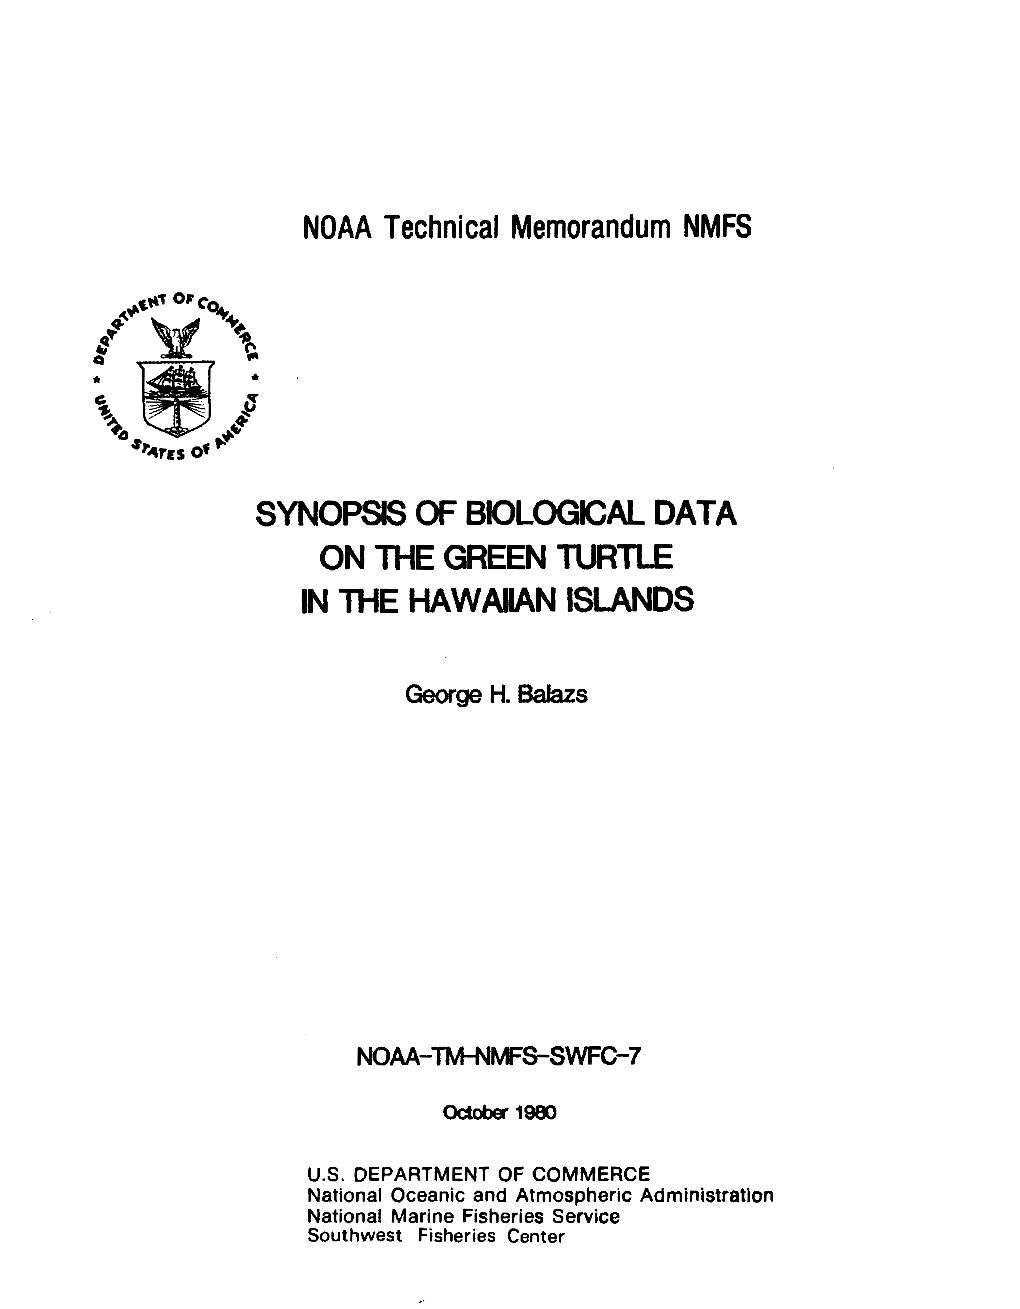 Synopsis of Bdlogcal Data on the Green Turtle in the Hawaiian Nds